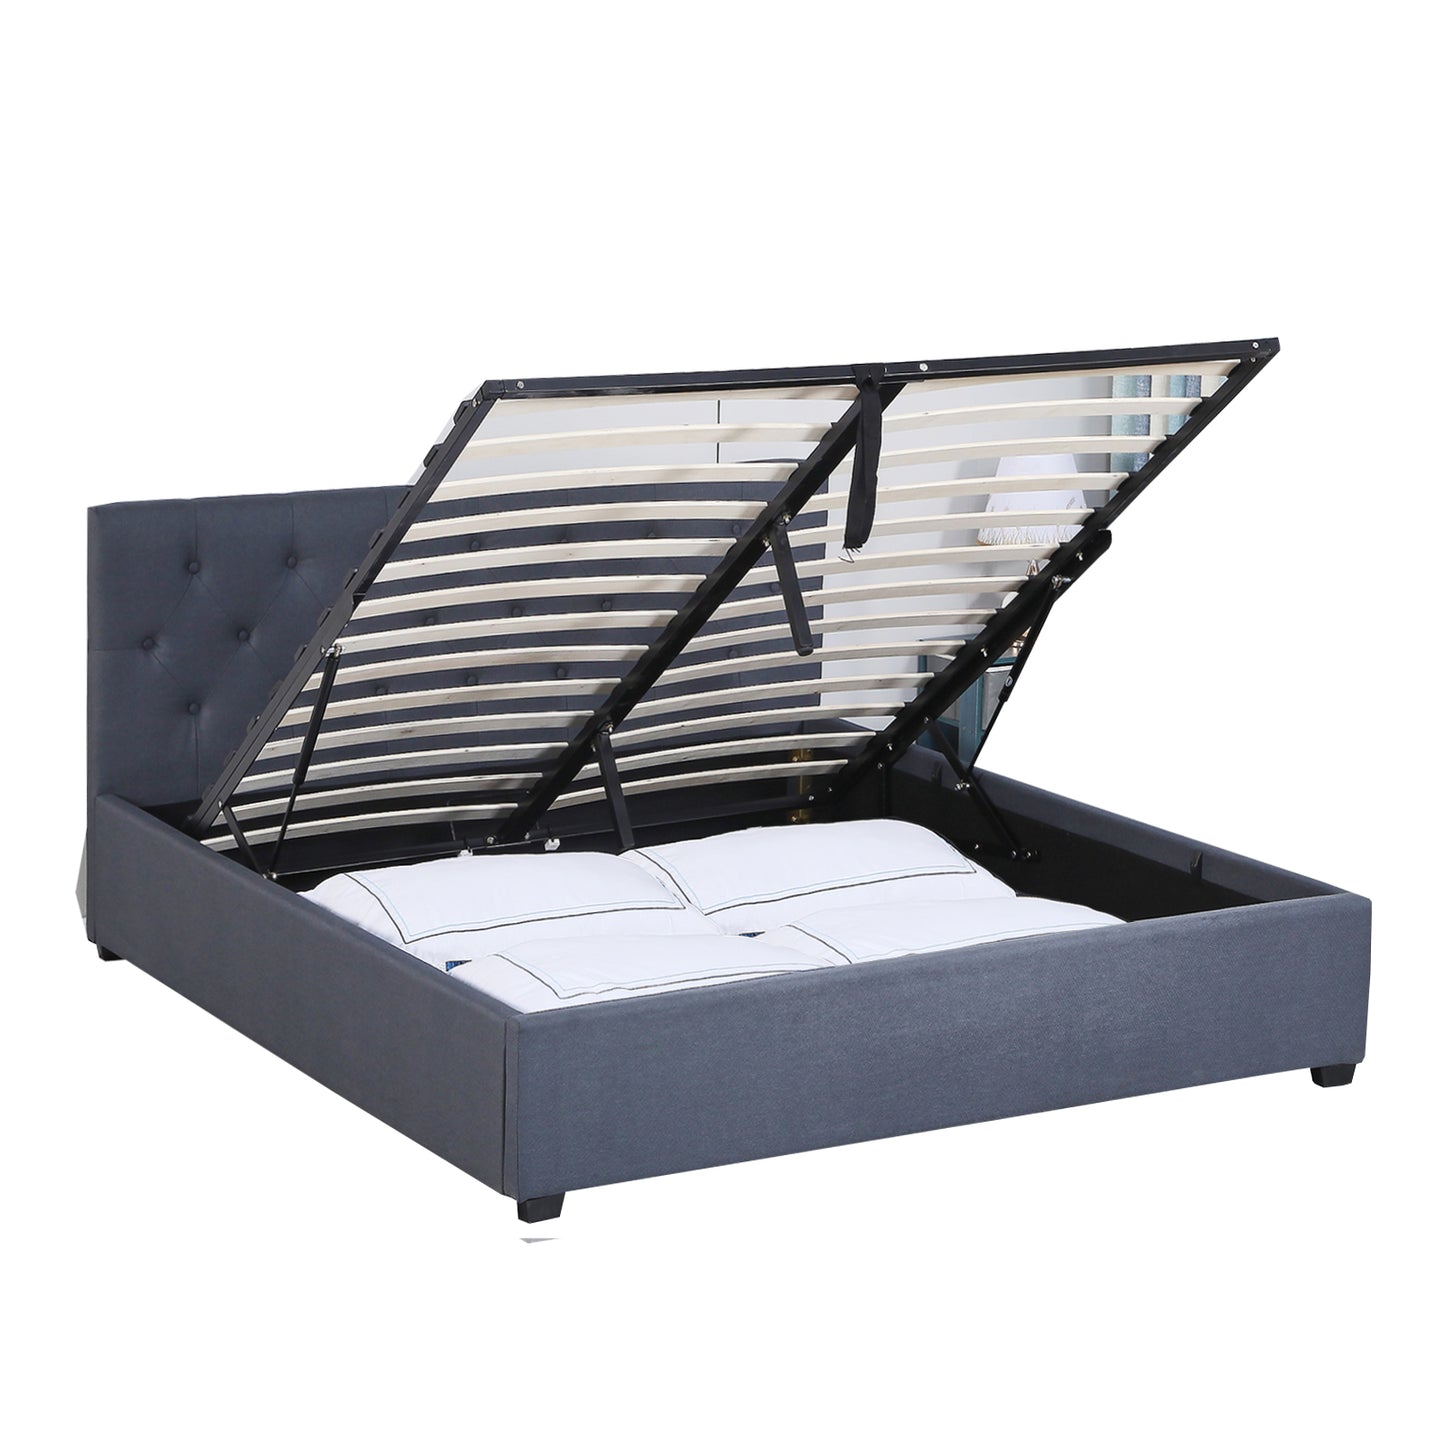 Milano Capri Luxury Gas Lift Bed Frame Base And Headboard With Storage - King - Charcoal